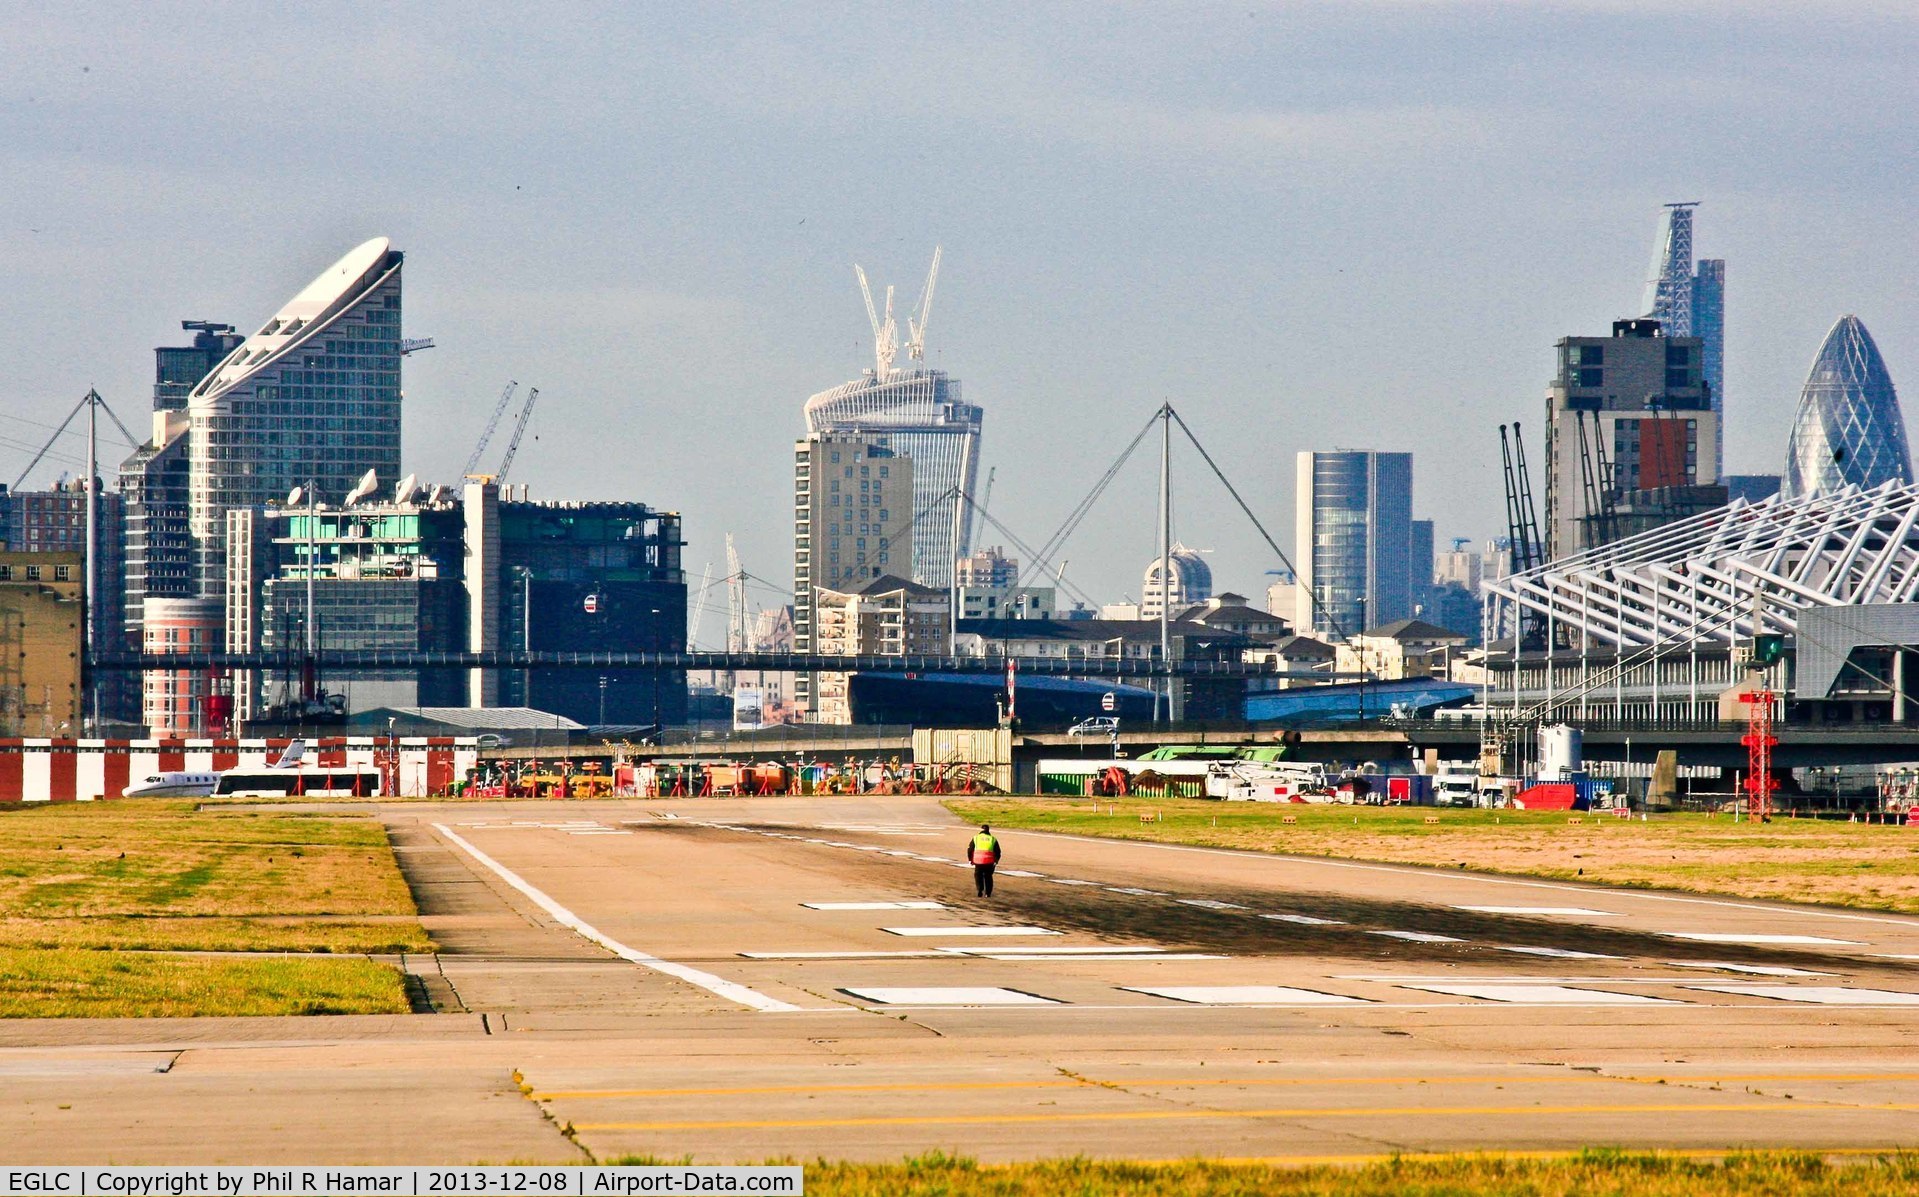 London City Airport, London, England United Kingdom (EGLC) - It's after noon on Sunday 8/12/2013 & LCY is opening up.